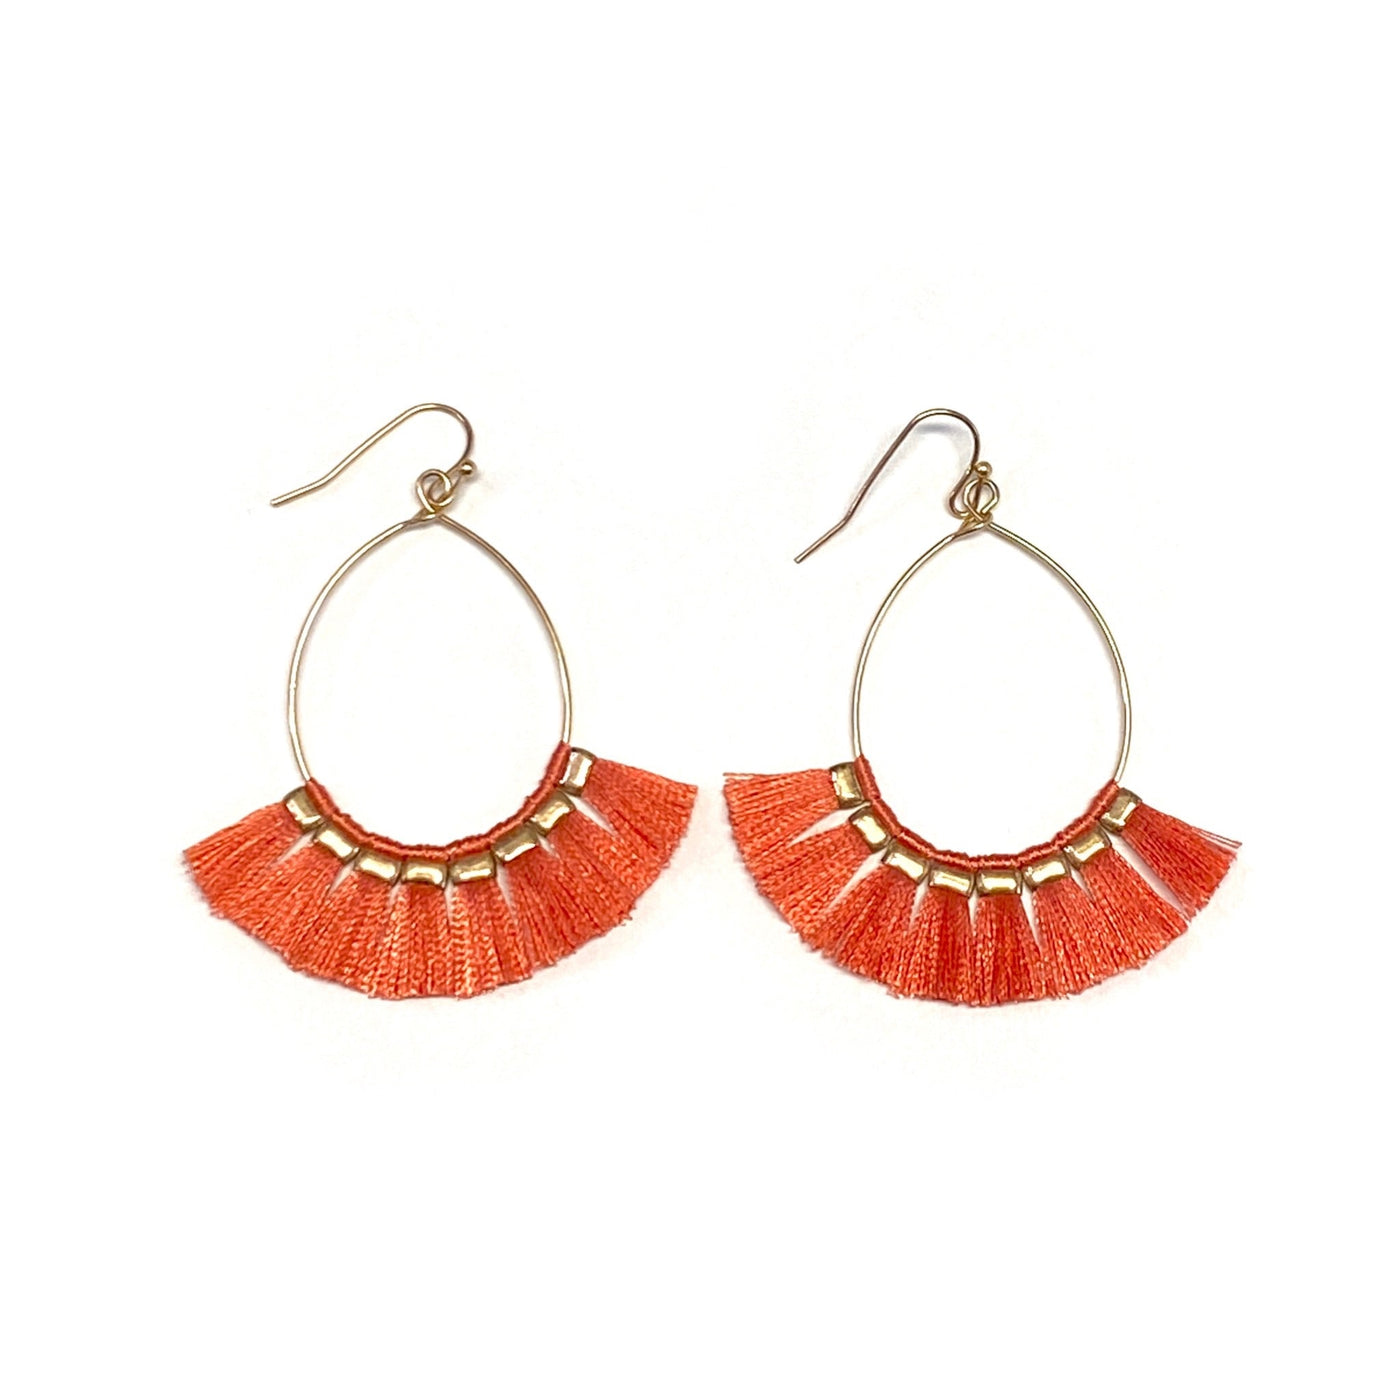 Just a Tassel Coral Earrings - Copper + Rose